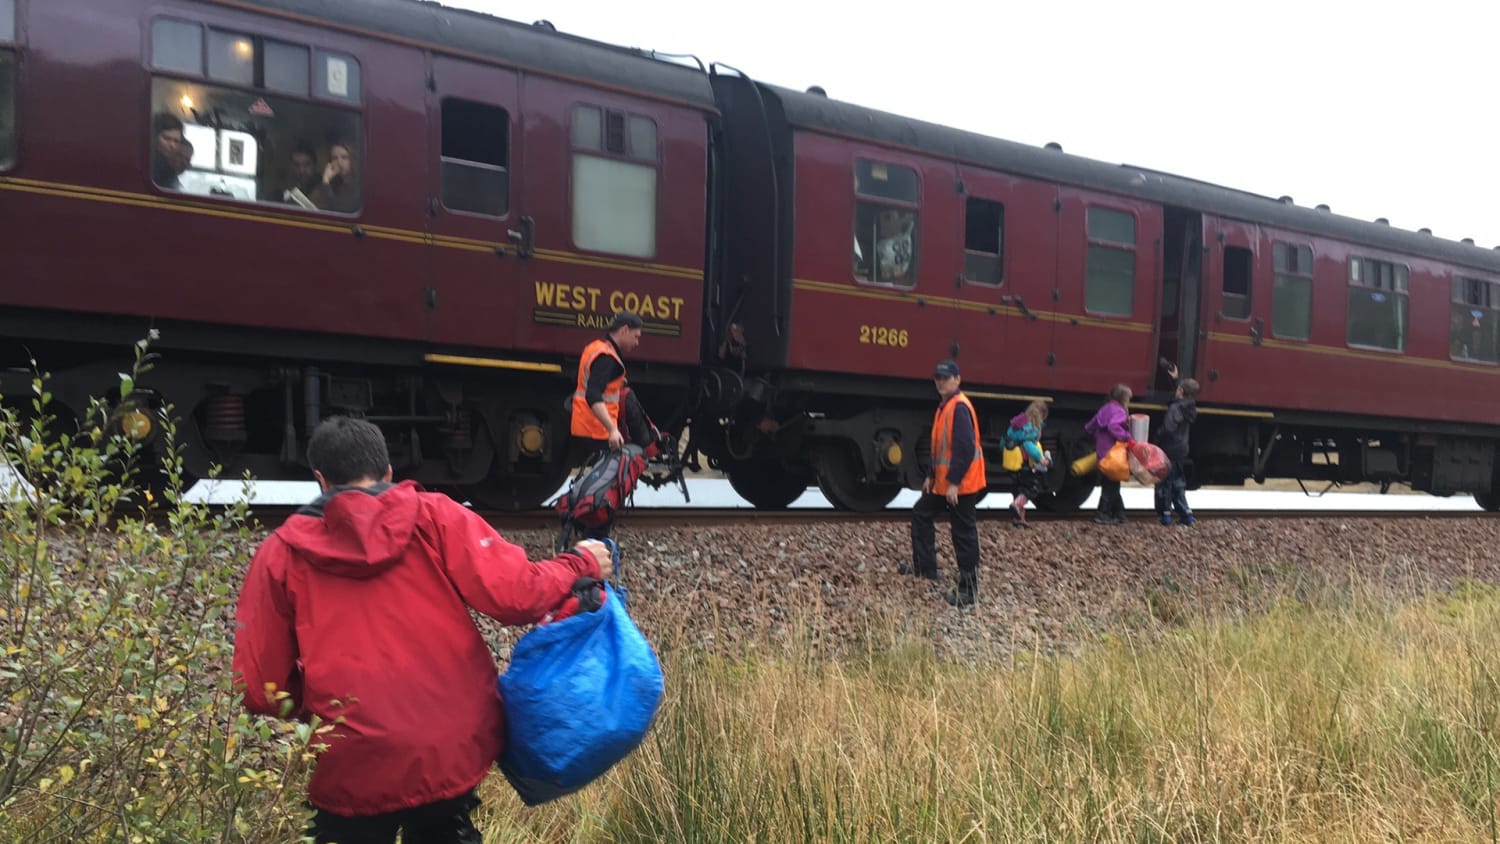 Hogwarts Express train rescues family stranded in Scotland - TODAY.com1920 x 1080